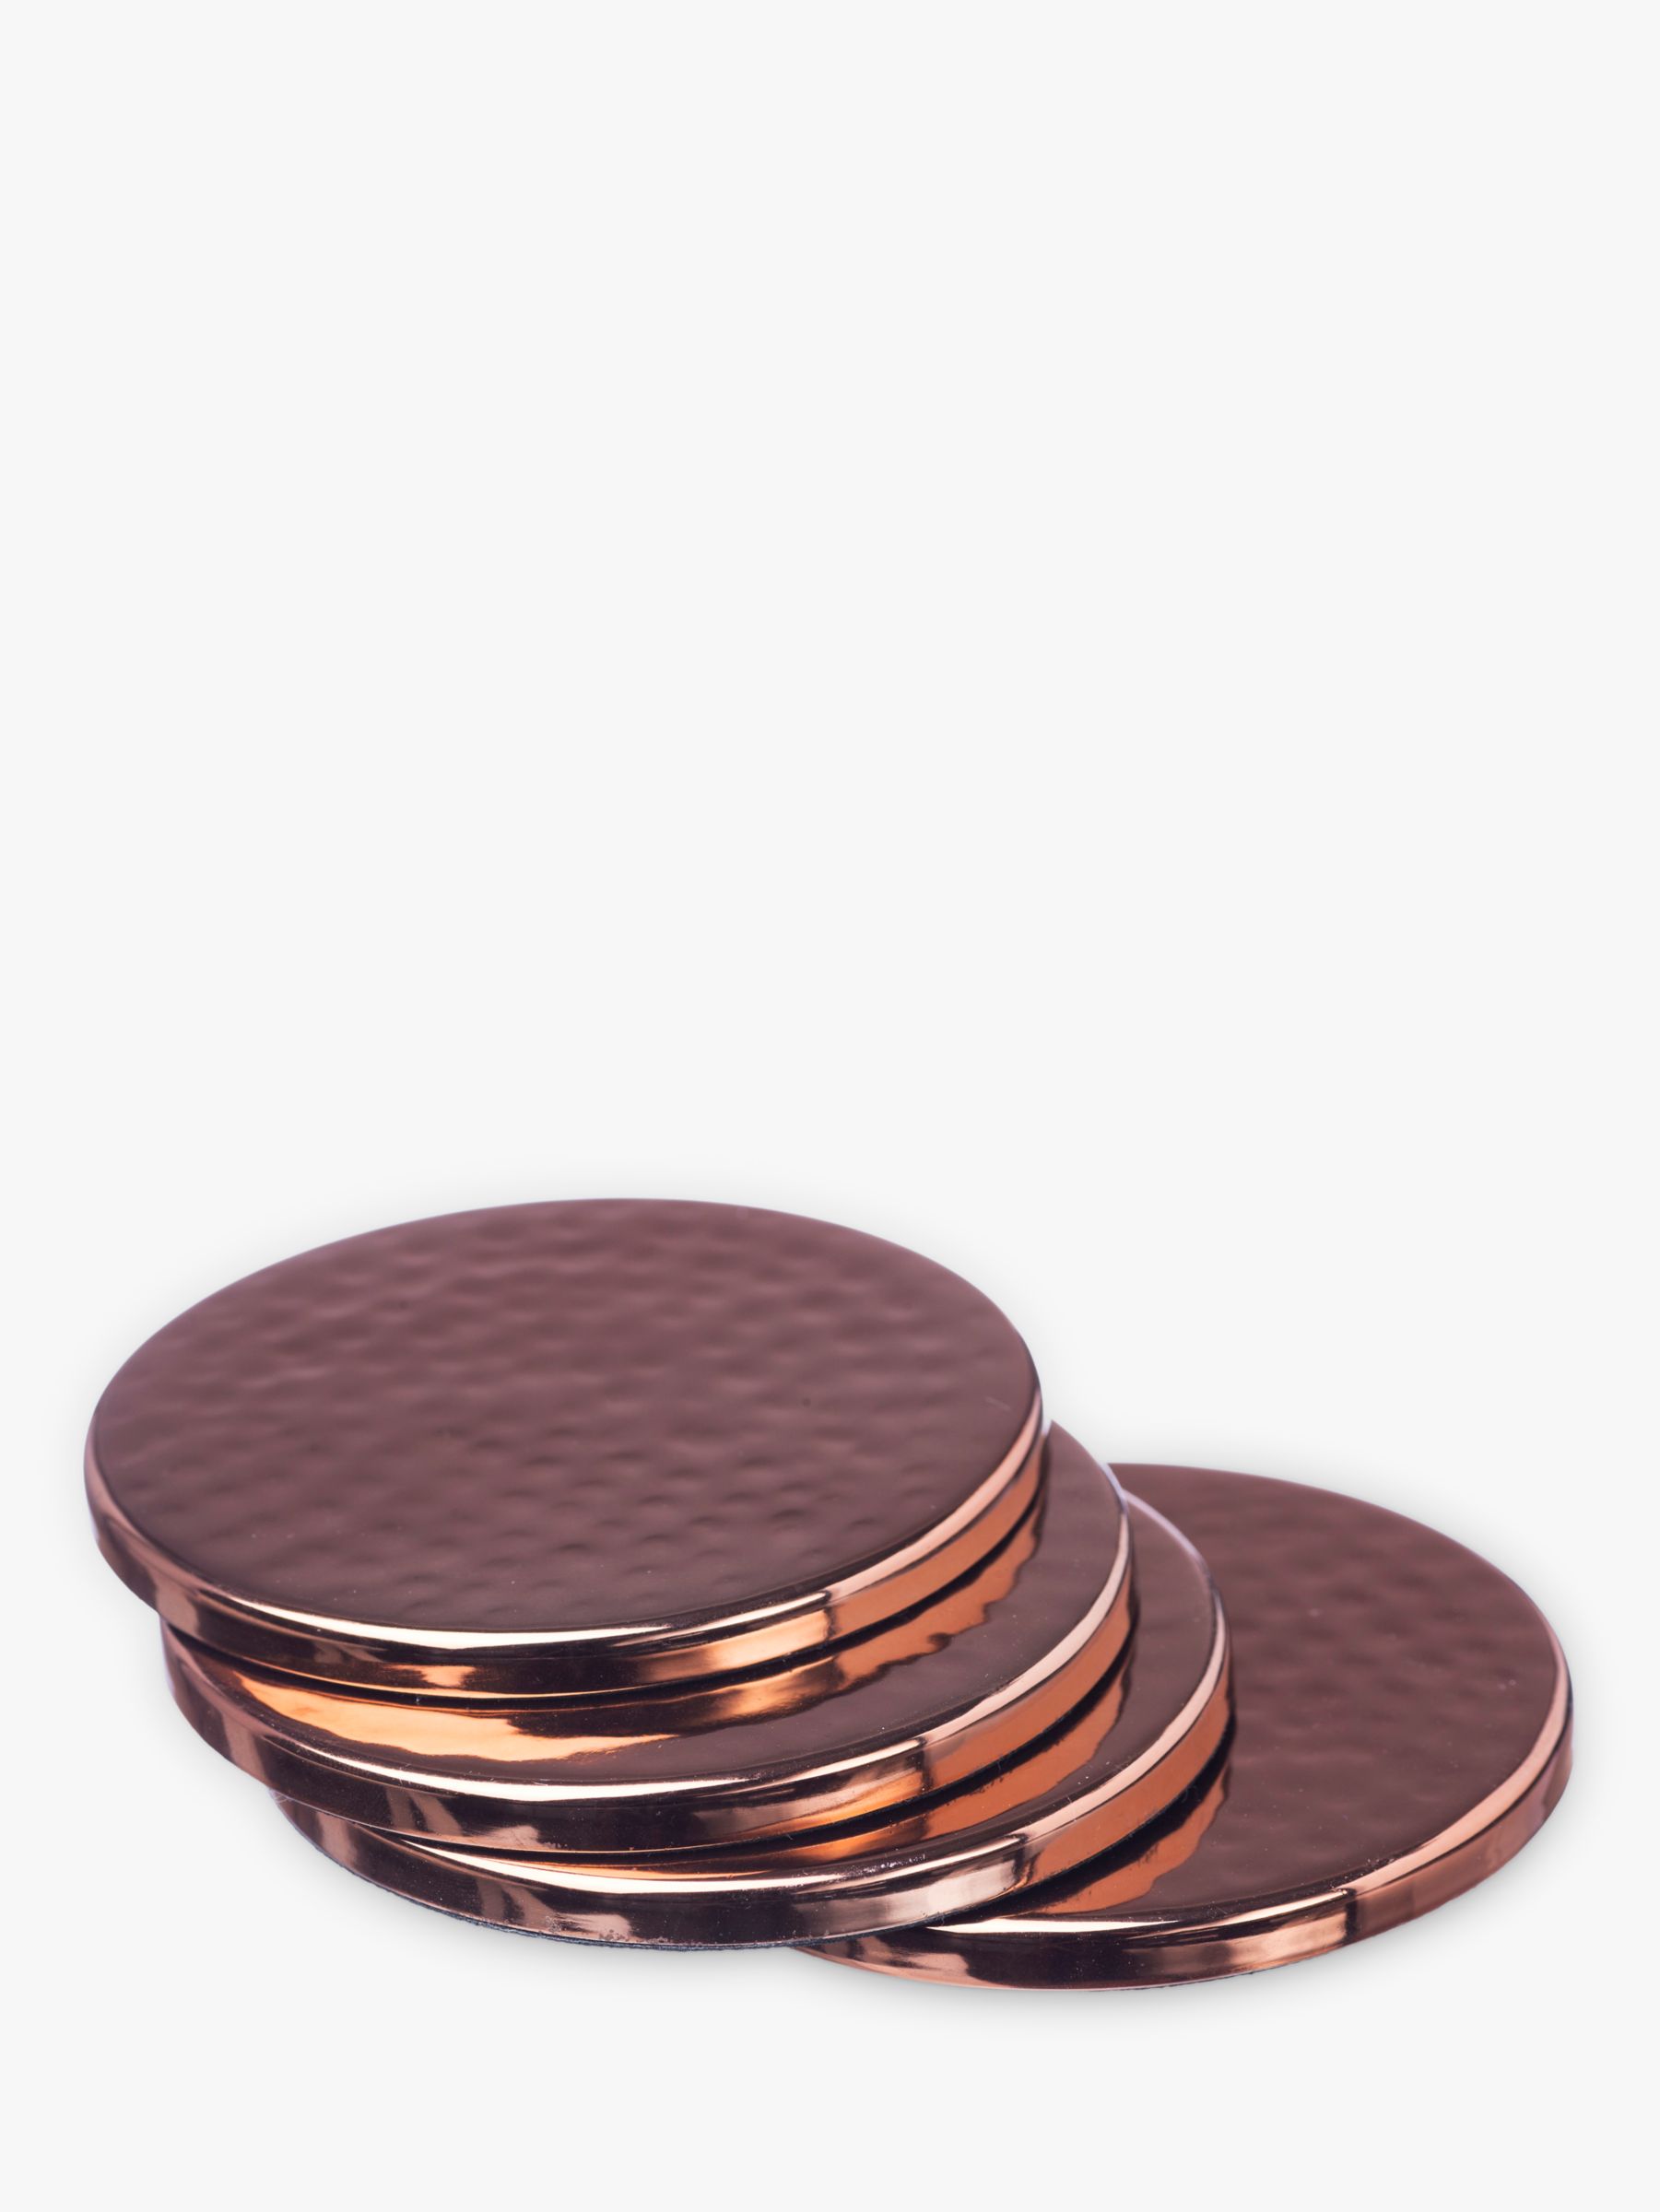 BuyJust Slate Copper Coasters, Set of 4 Online at johnlewis.com